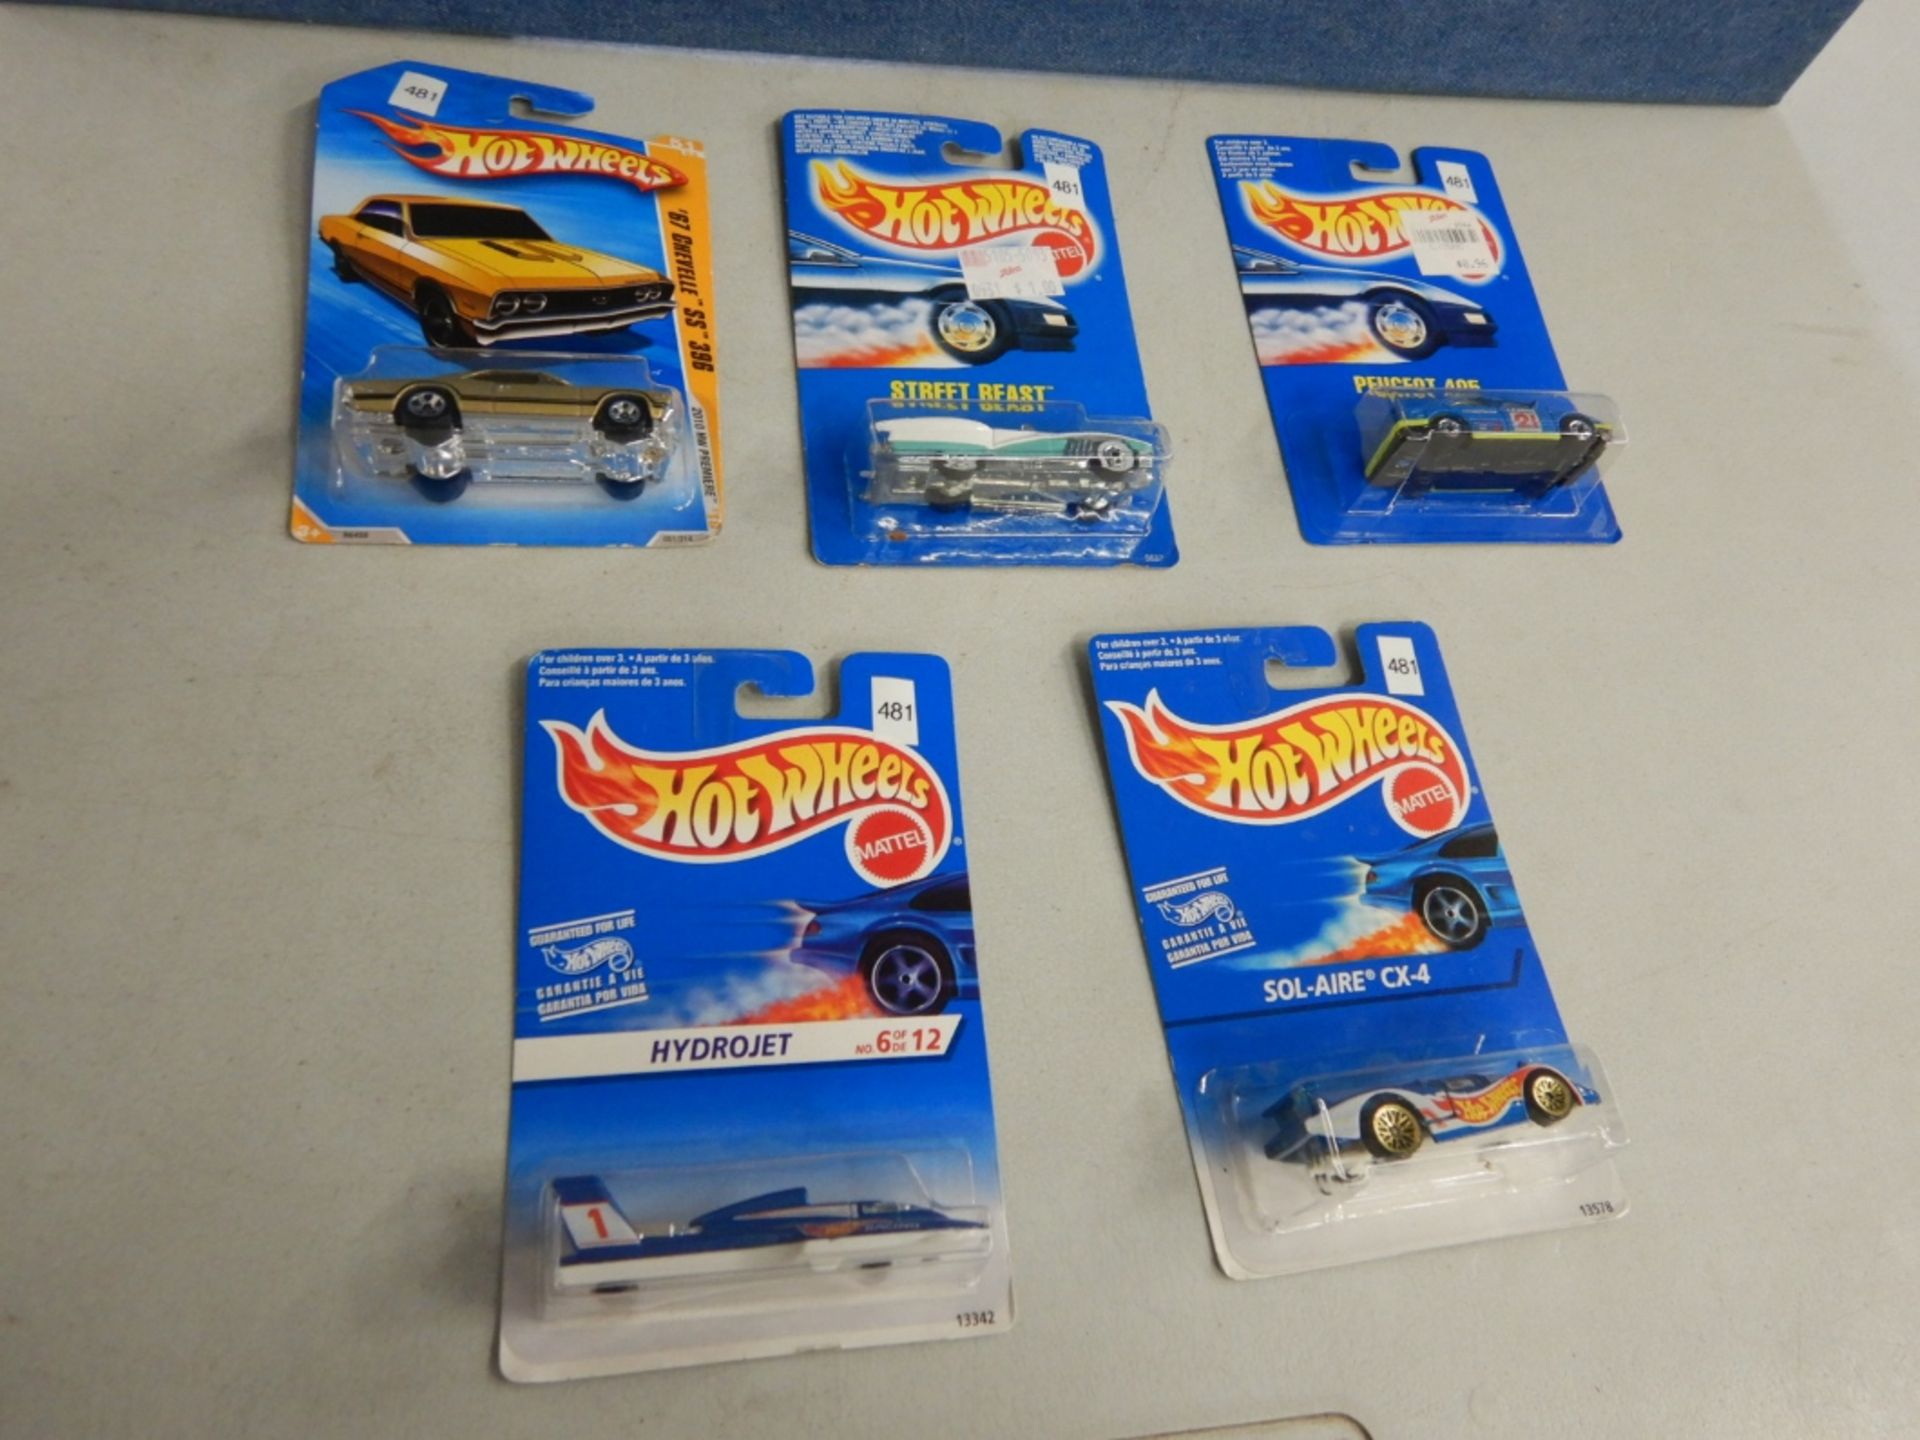 HOT WHEELS CARS - "SOLE-AIRE CX4", "76 CHEVELLE SS 396", "PEUGOT 405", "STREETBEAST", "HYDROJET"